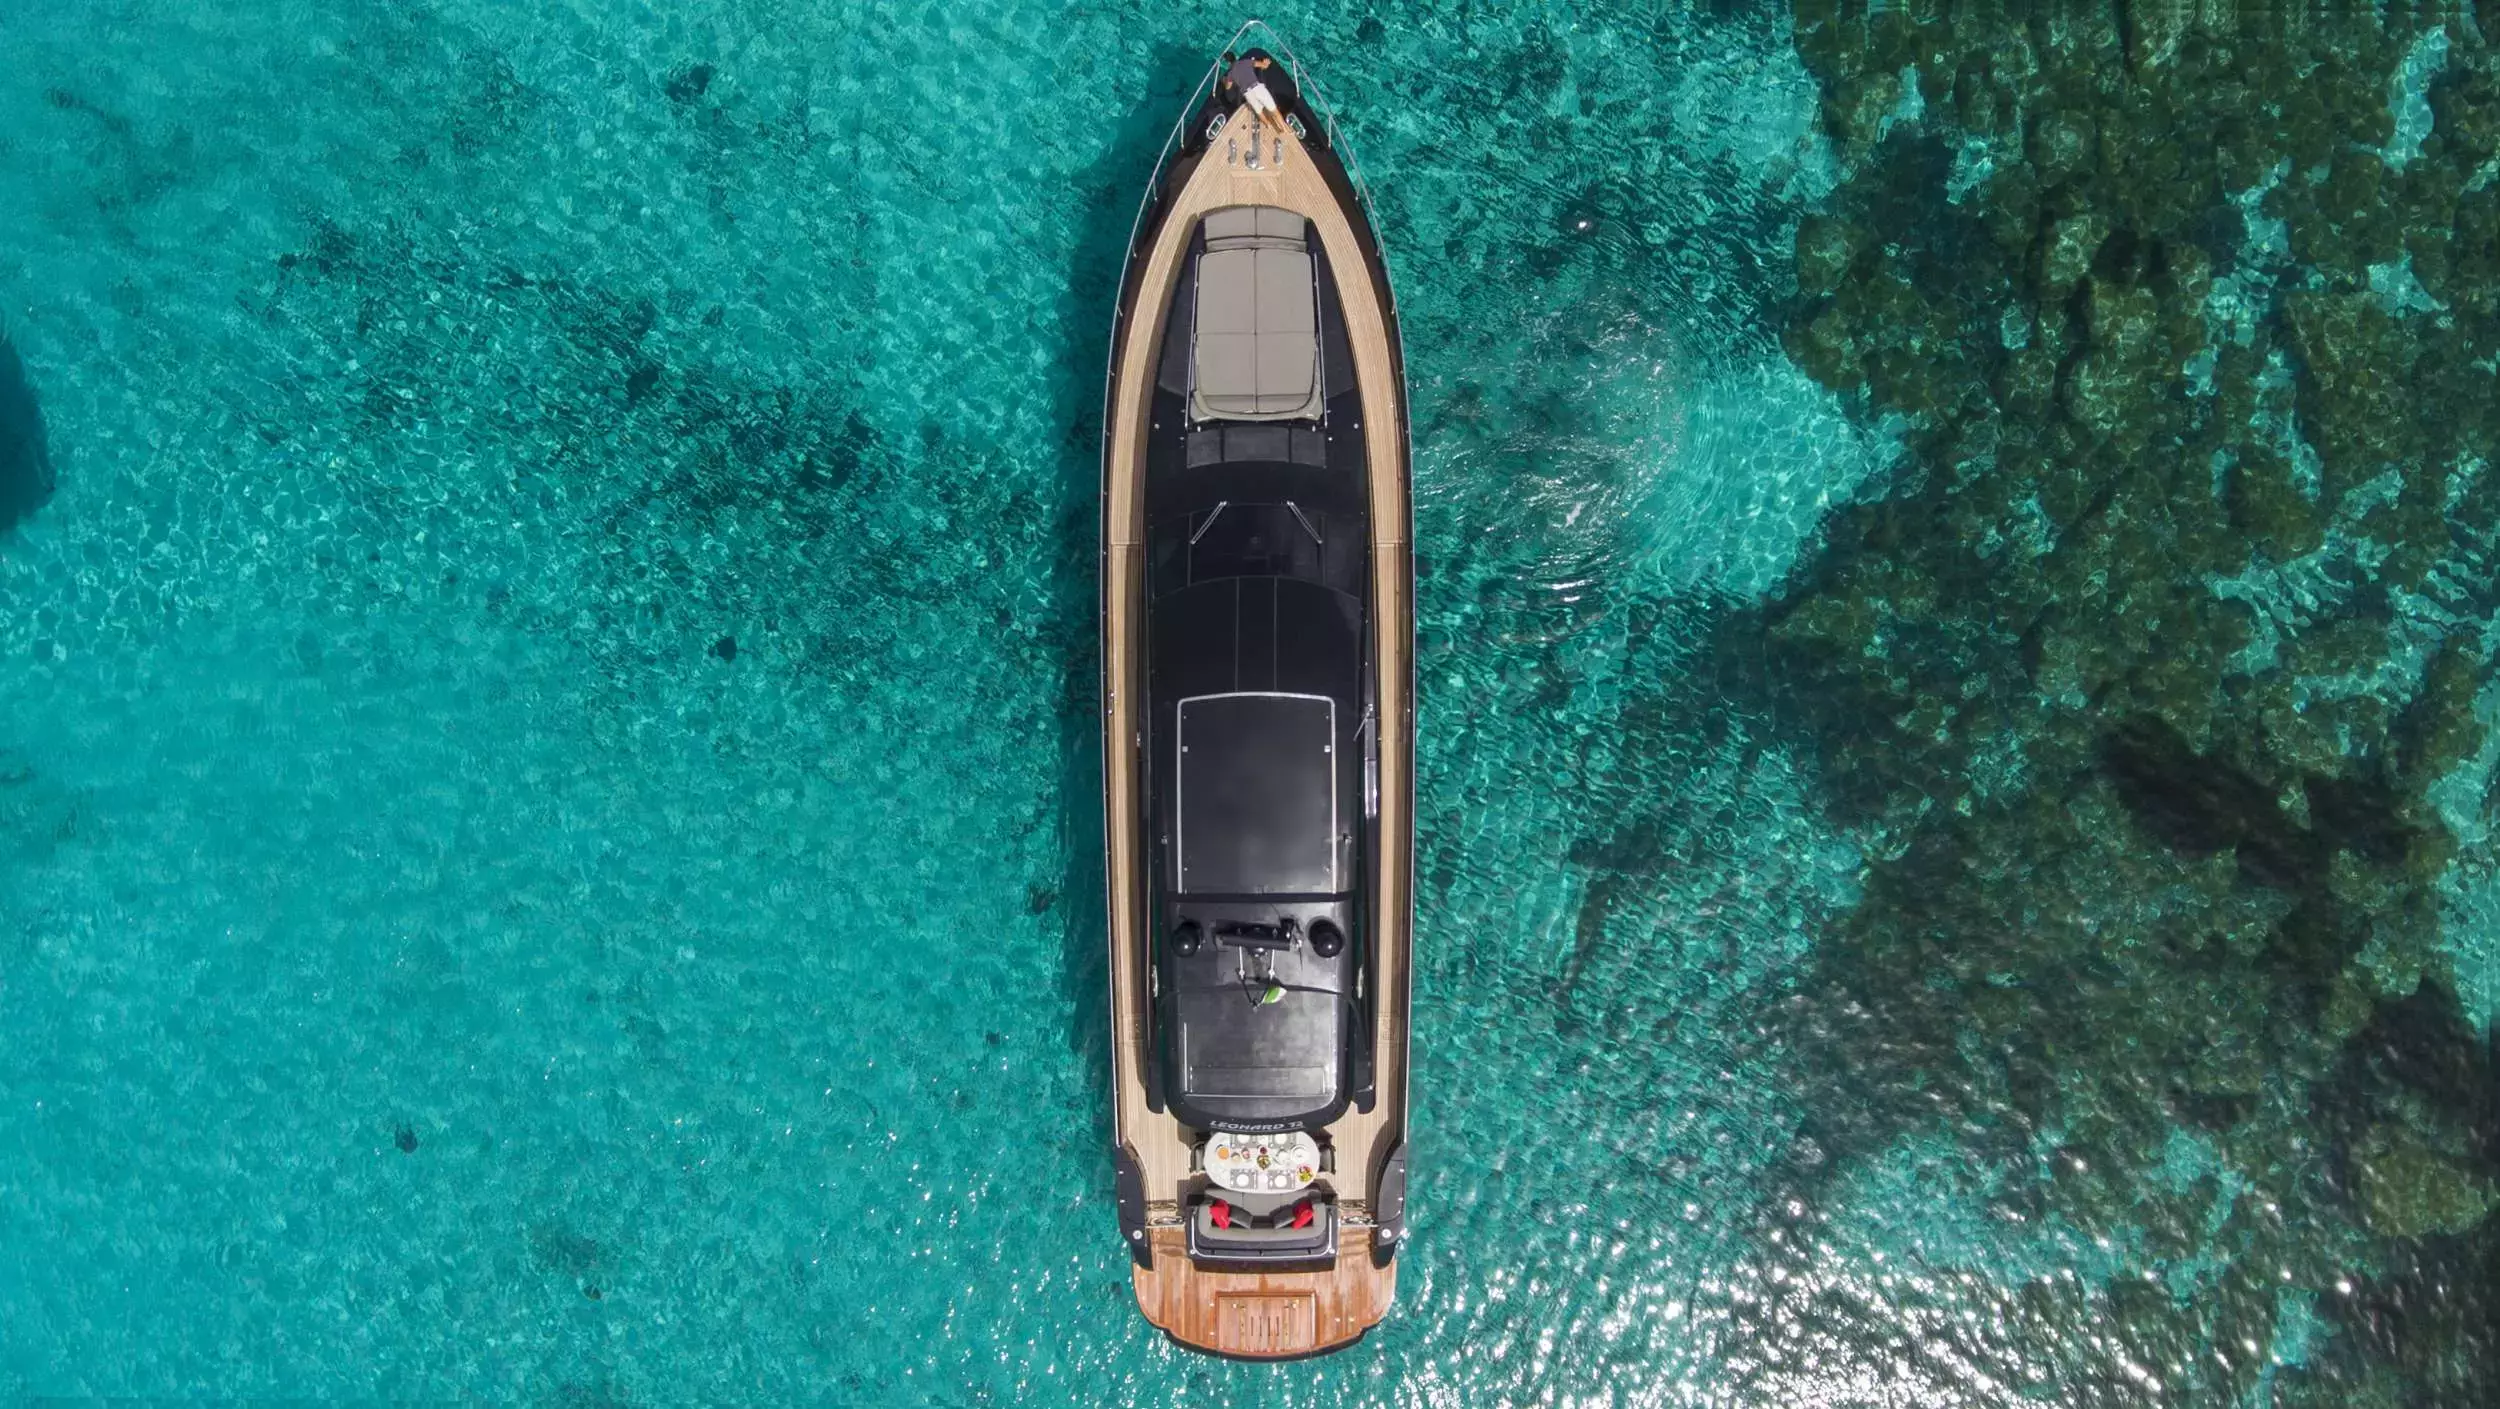 Black Magic by Custom Made - Top rates for a Charter of a private Motor Yacht in Italy